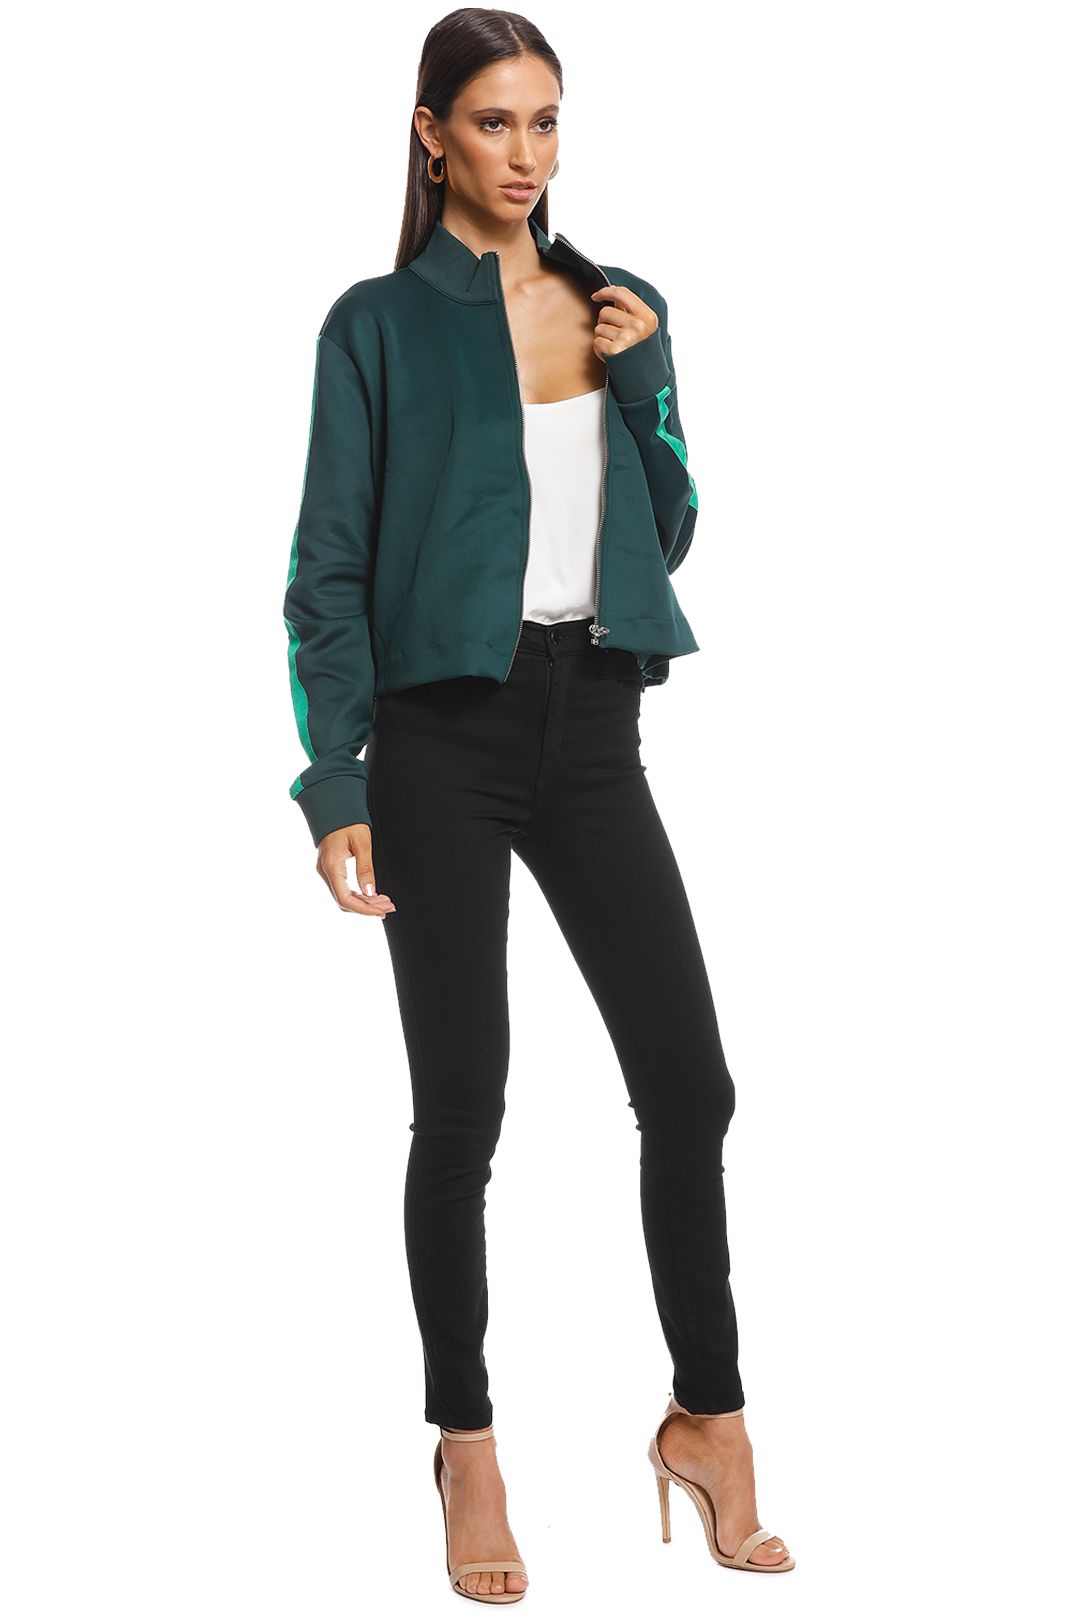 Camilla and Marc - Arie Track Jacket - Green - Side